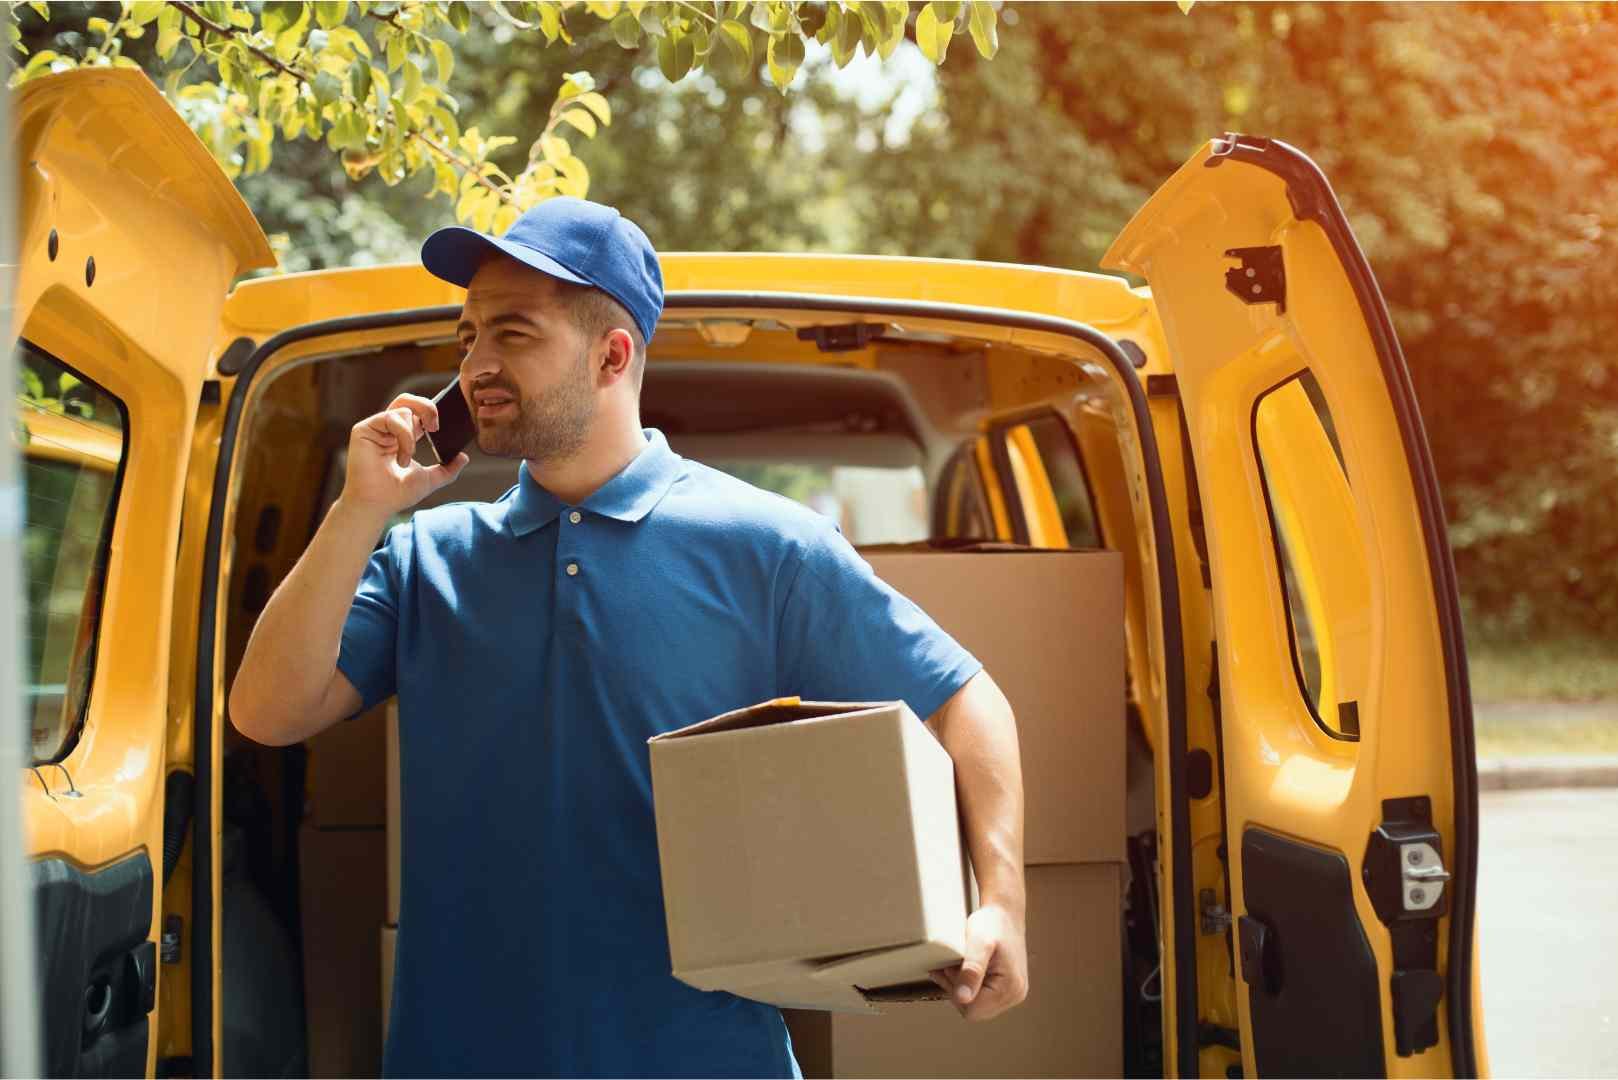 delivery worker on the phone while holding a package